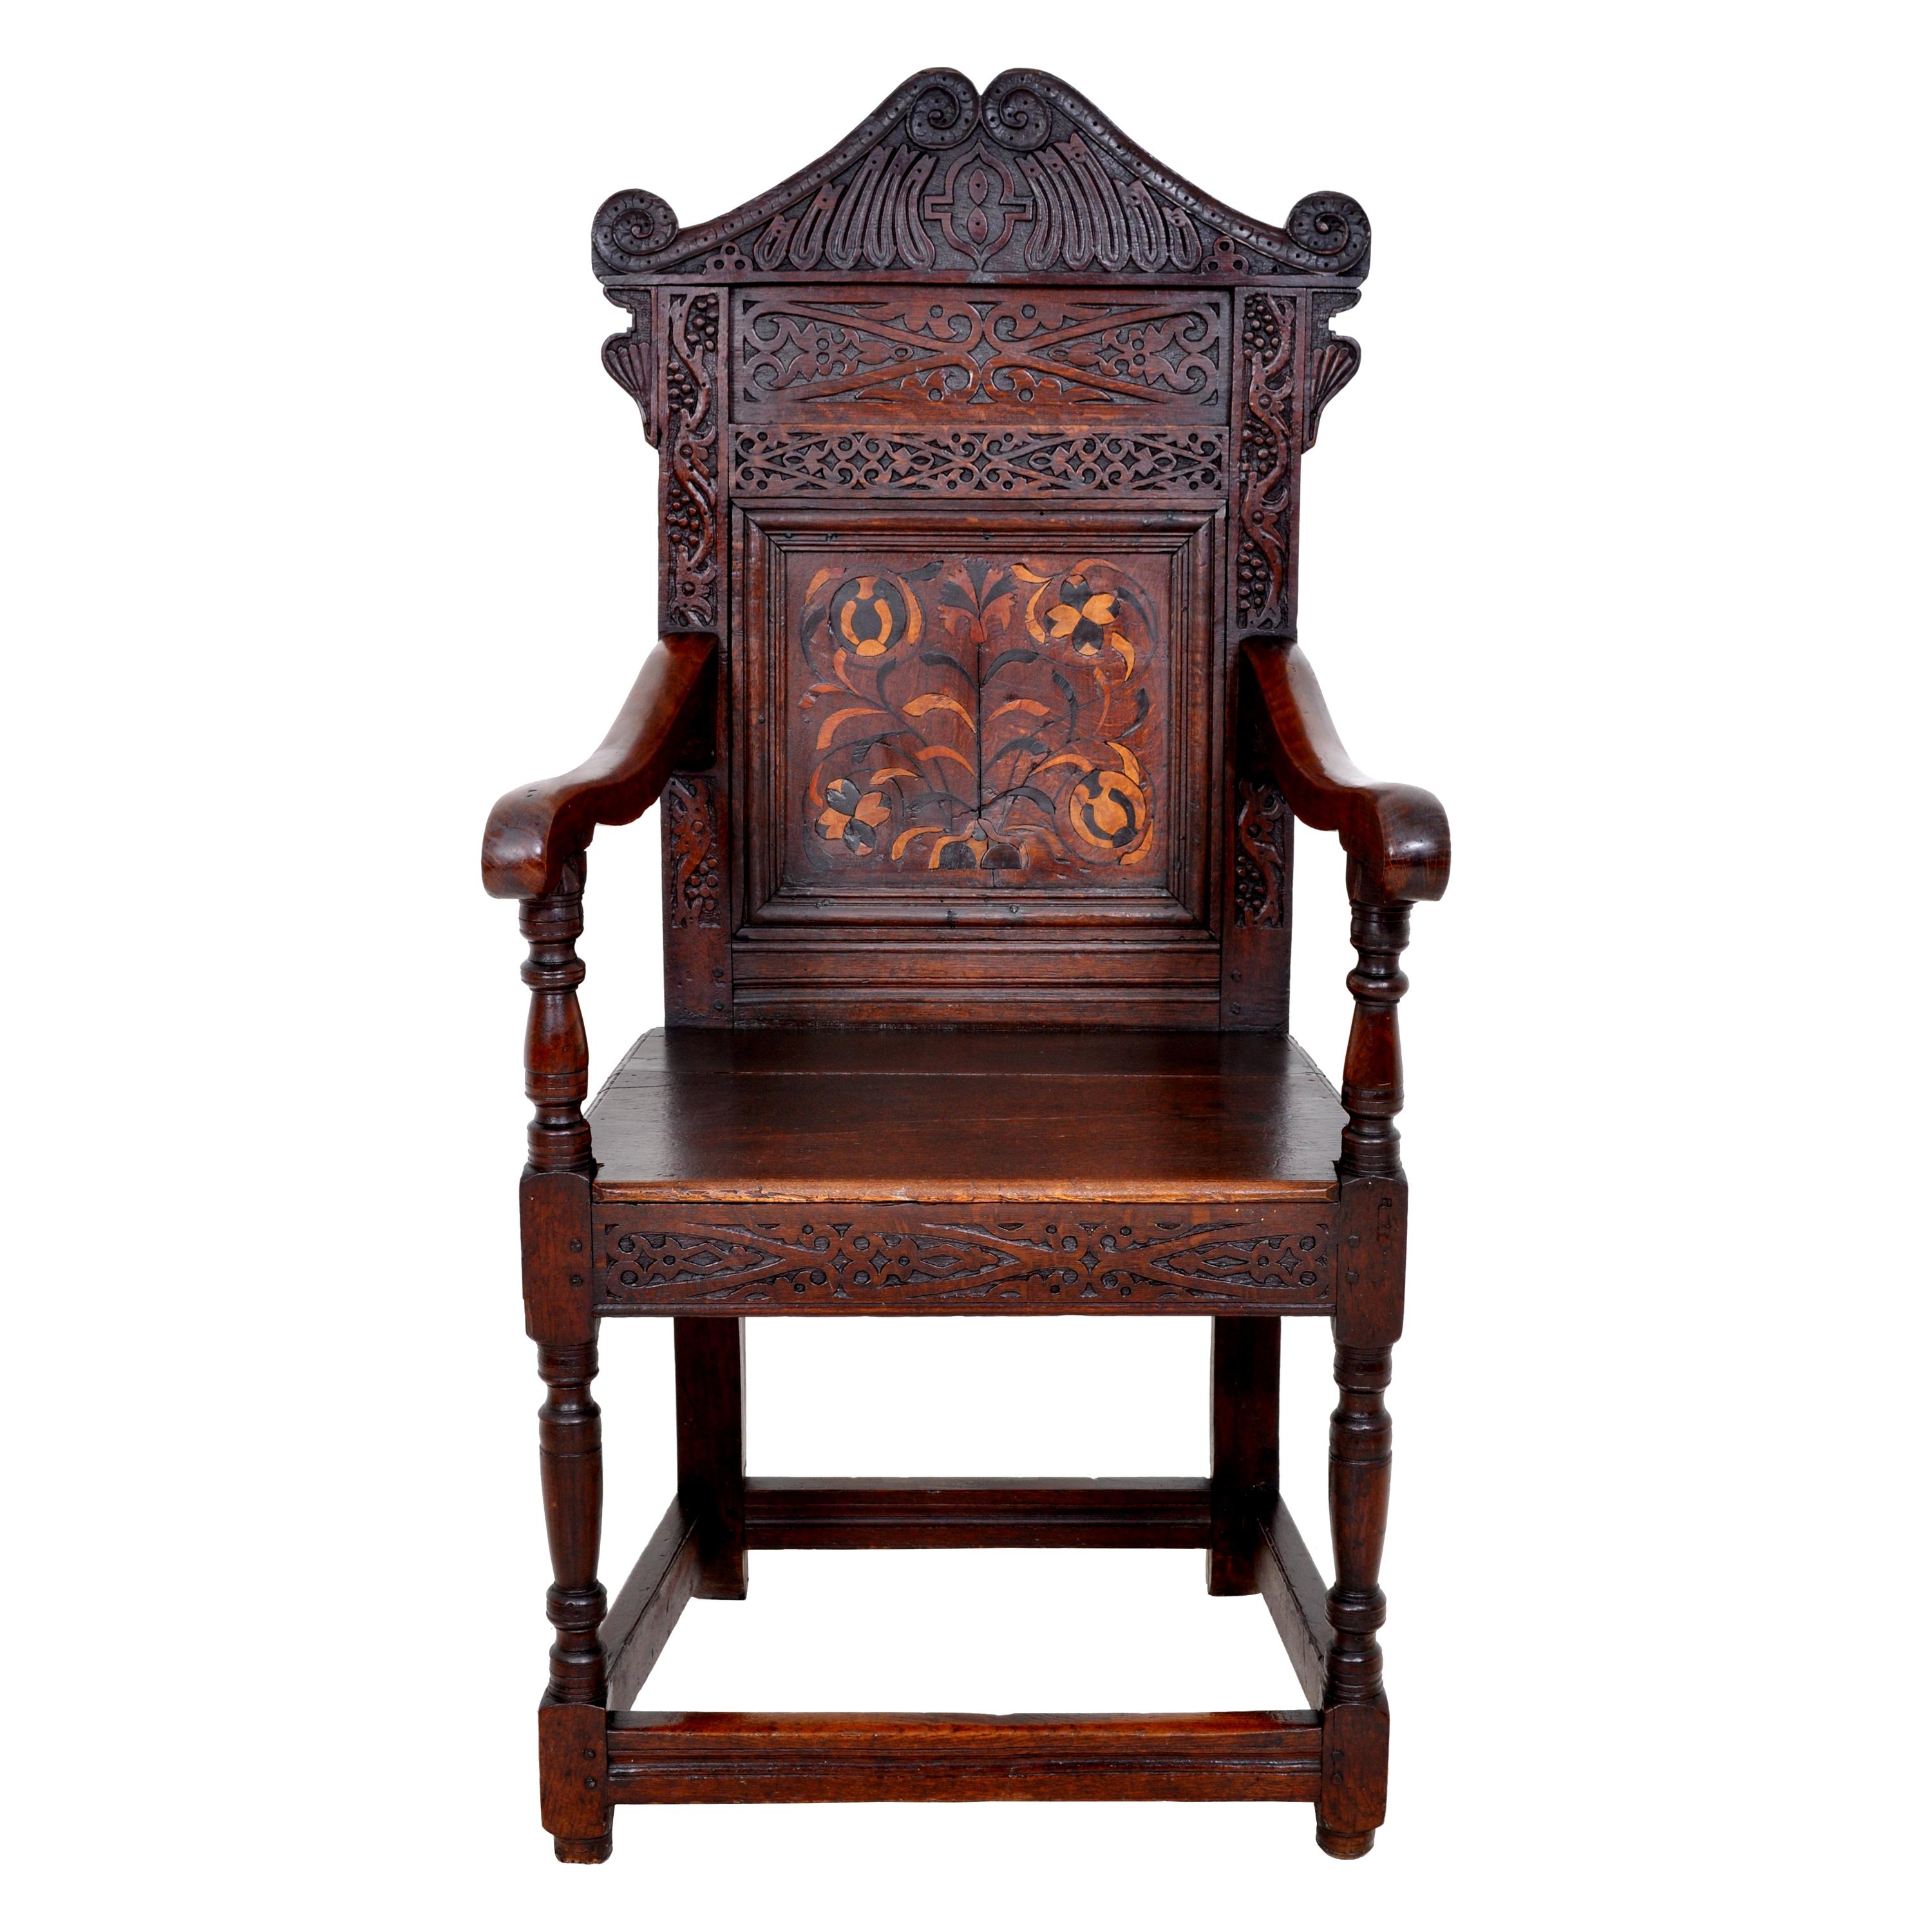 Antique 17th Century Charles II Yorkshire Carved Inlaid Oak Wainscot Chair, 1670